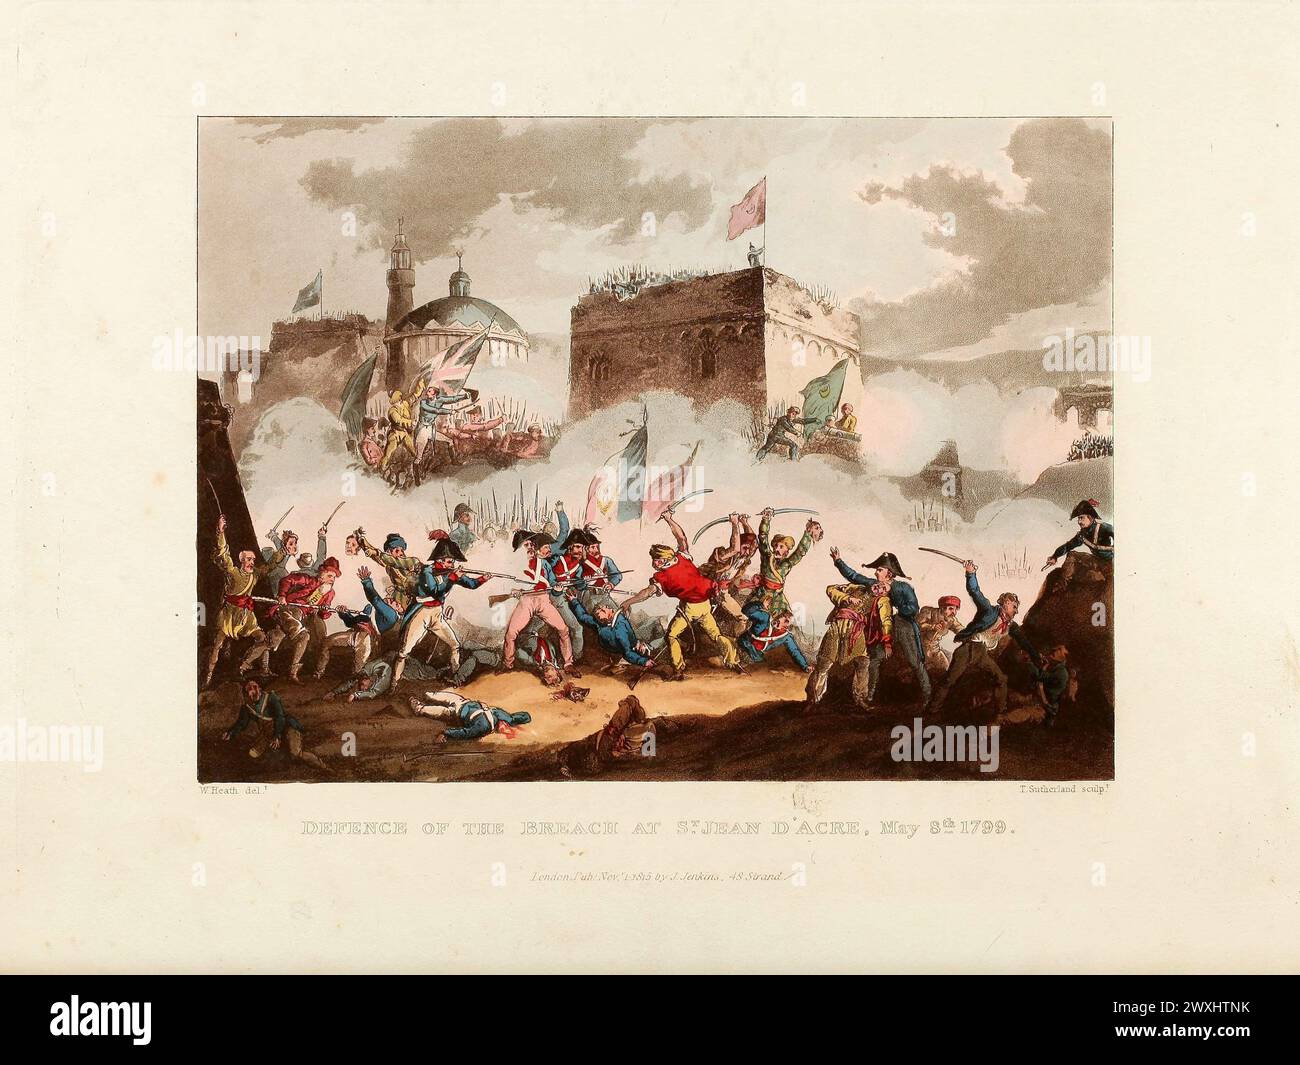 Defence of the Breach at St-Jean d'Acre, Amy 8th 1799.  Vintage Coloured Aquatint, published by James Jenkins, 1815,  from  The martial achievements of Great Britain and her allies : from 1799 to 1815. Stock Photo